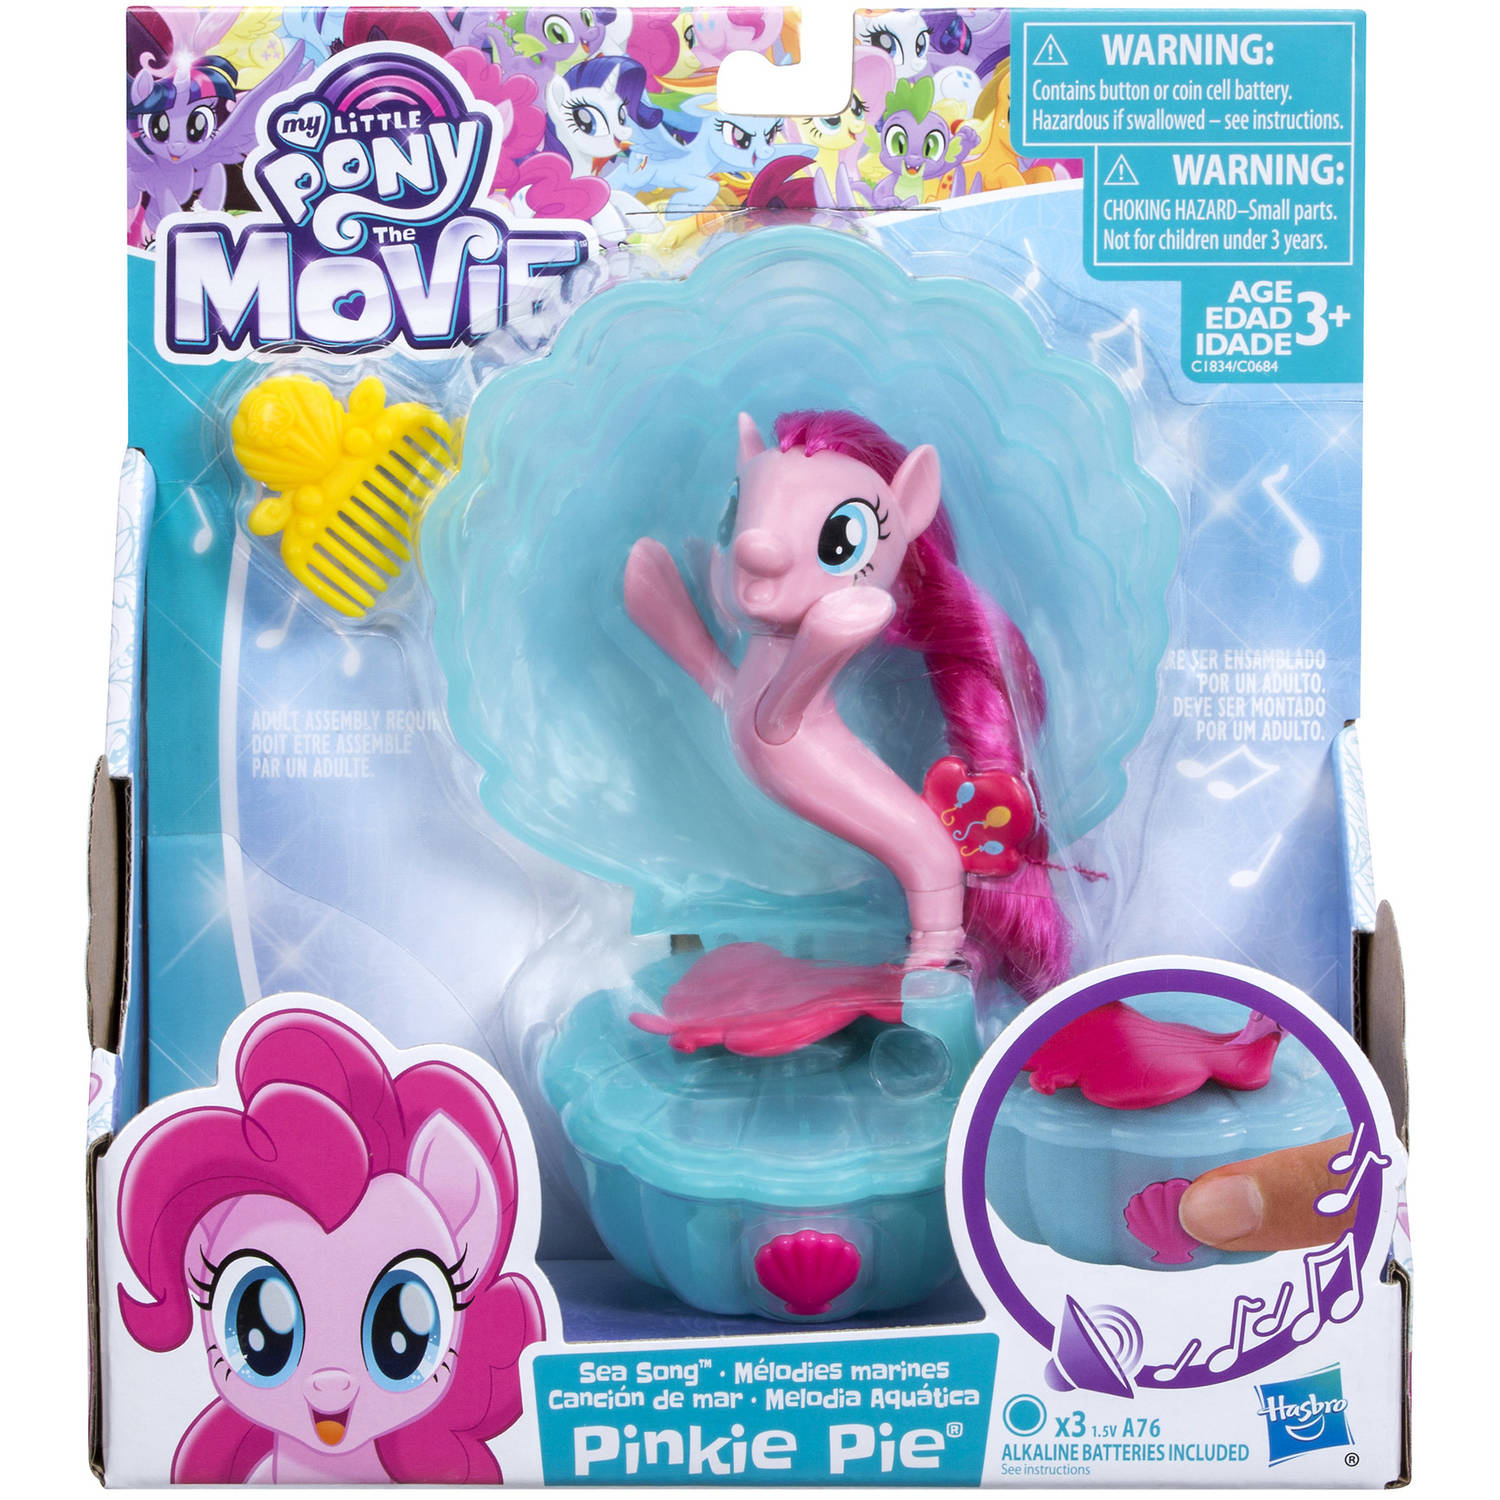 My Little Pony: the Movie Pinkie Pie Sea Song - image 2 of 6